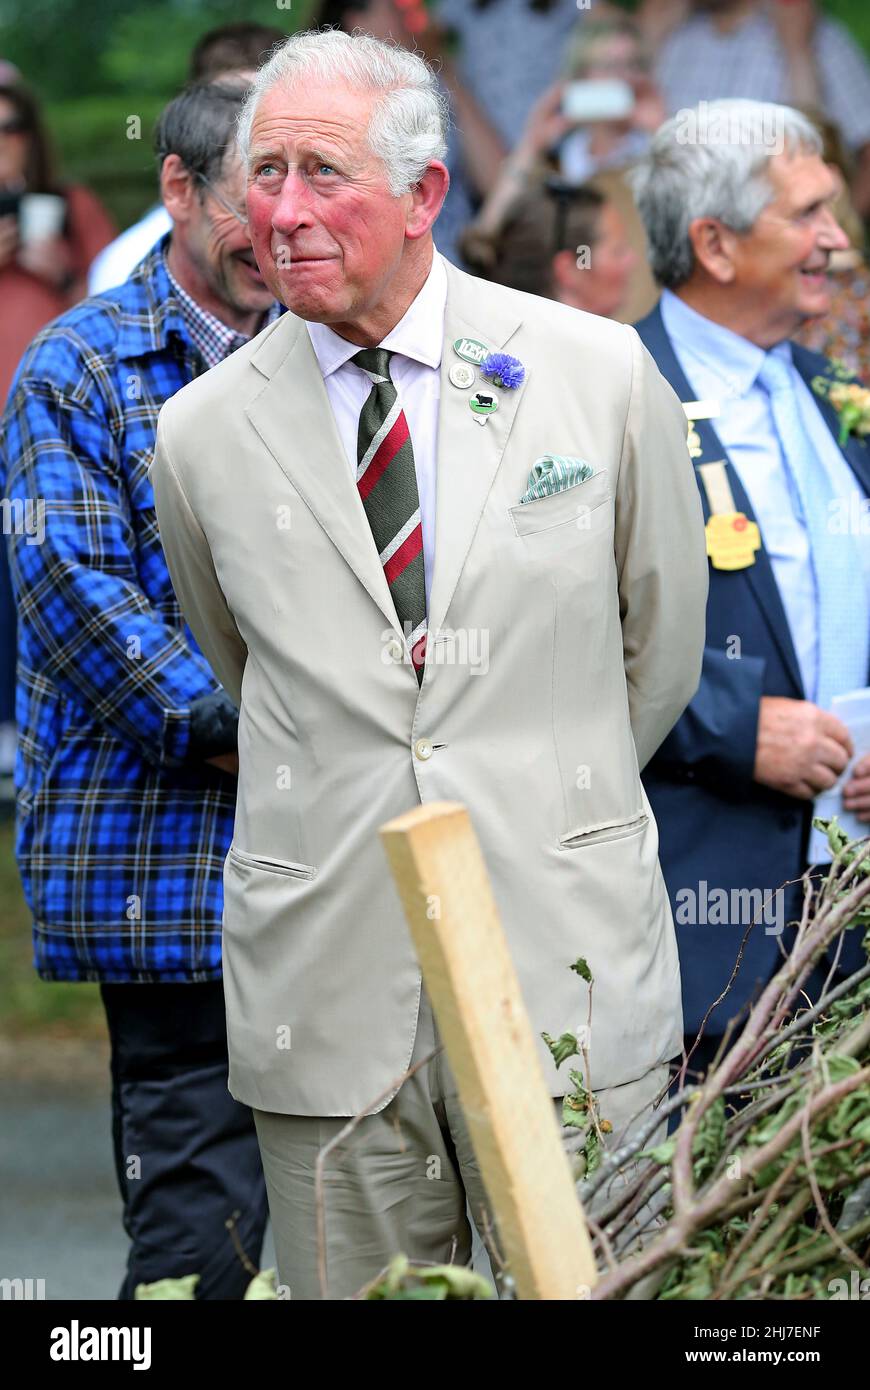 Prince Charles and the Duchess of Cornwall visit the Royal Welsh Show in Llanelwedd on the 22nd of July 2019, as part of his Summer tour of Wales. Stock Photo